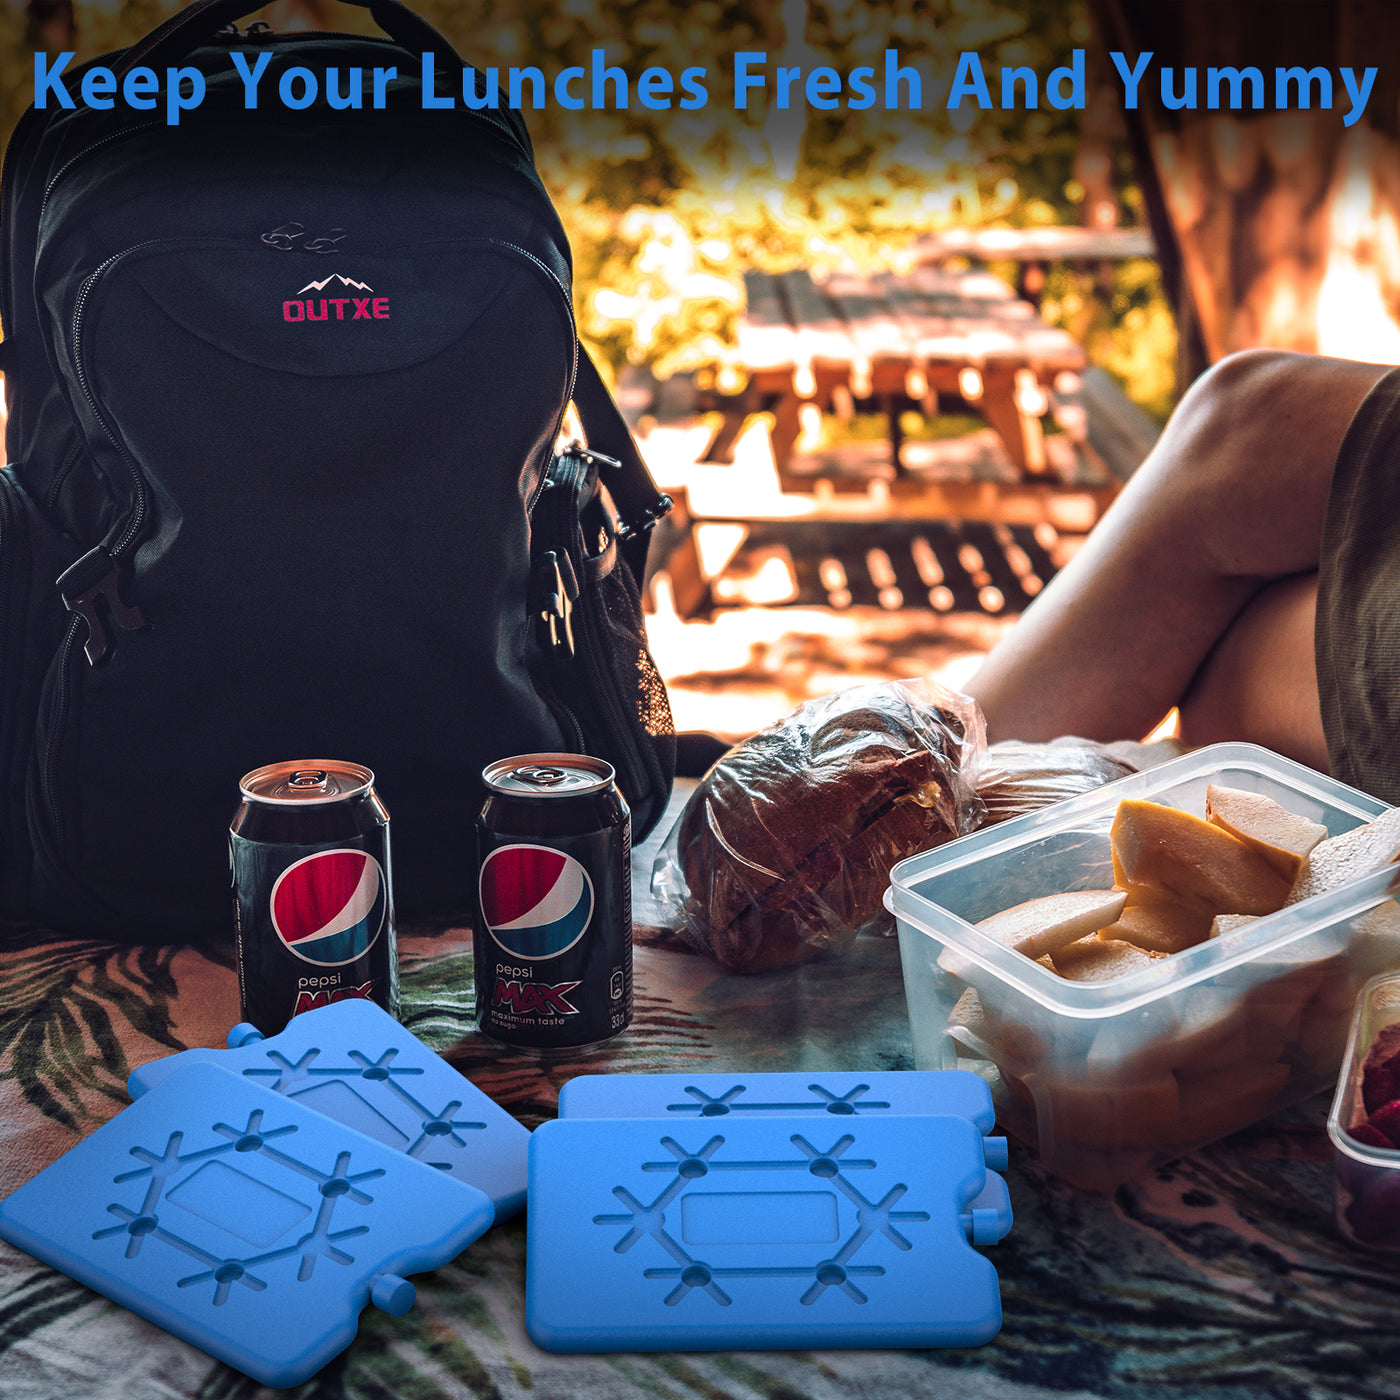 OUTXE Slim Reusable Small Ice Packs for Lunch Box 200ml